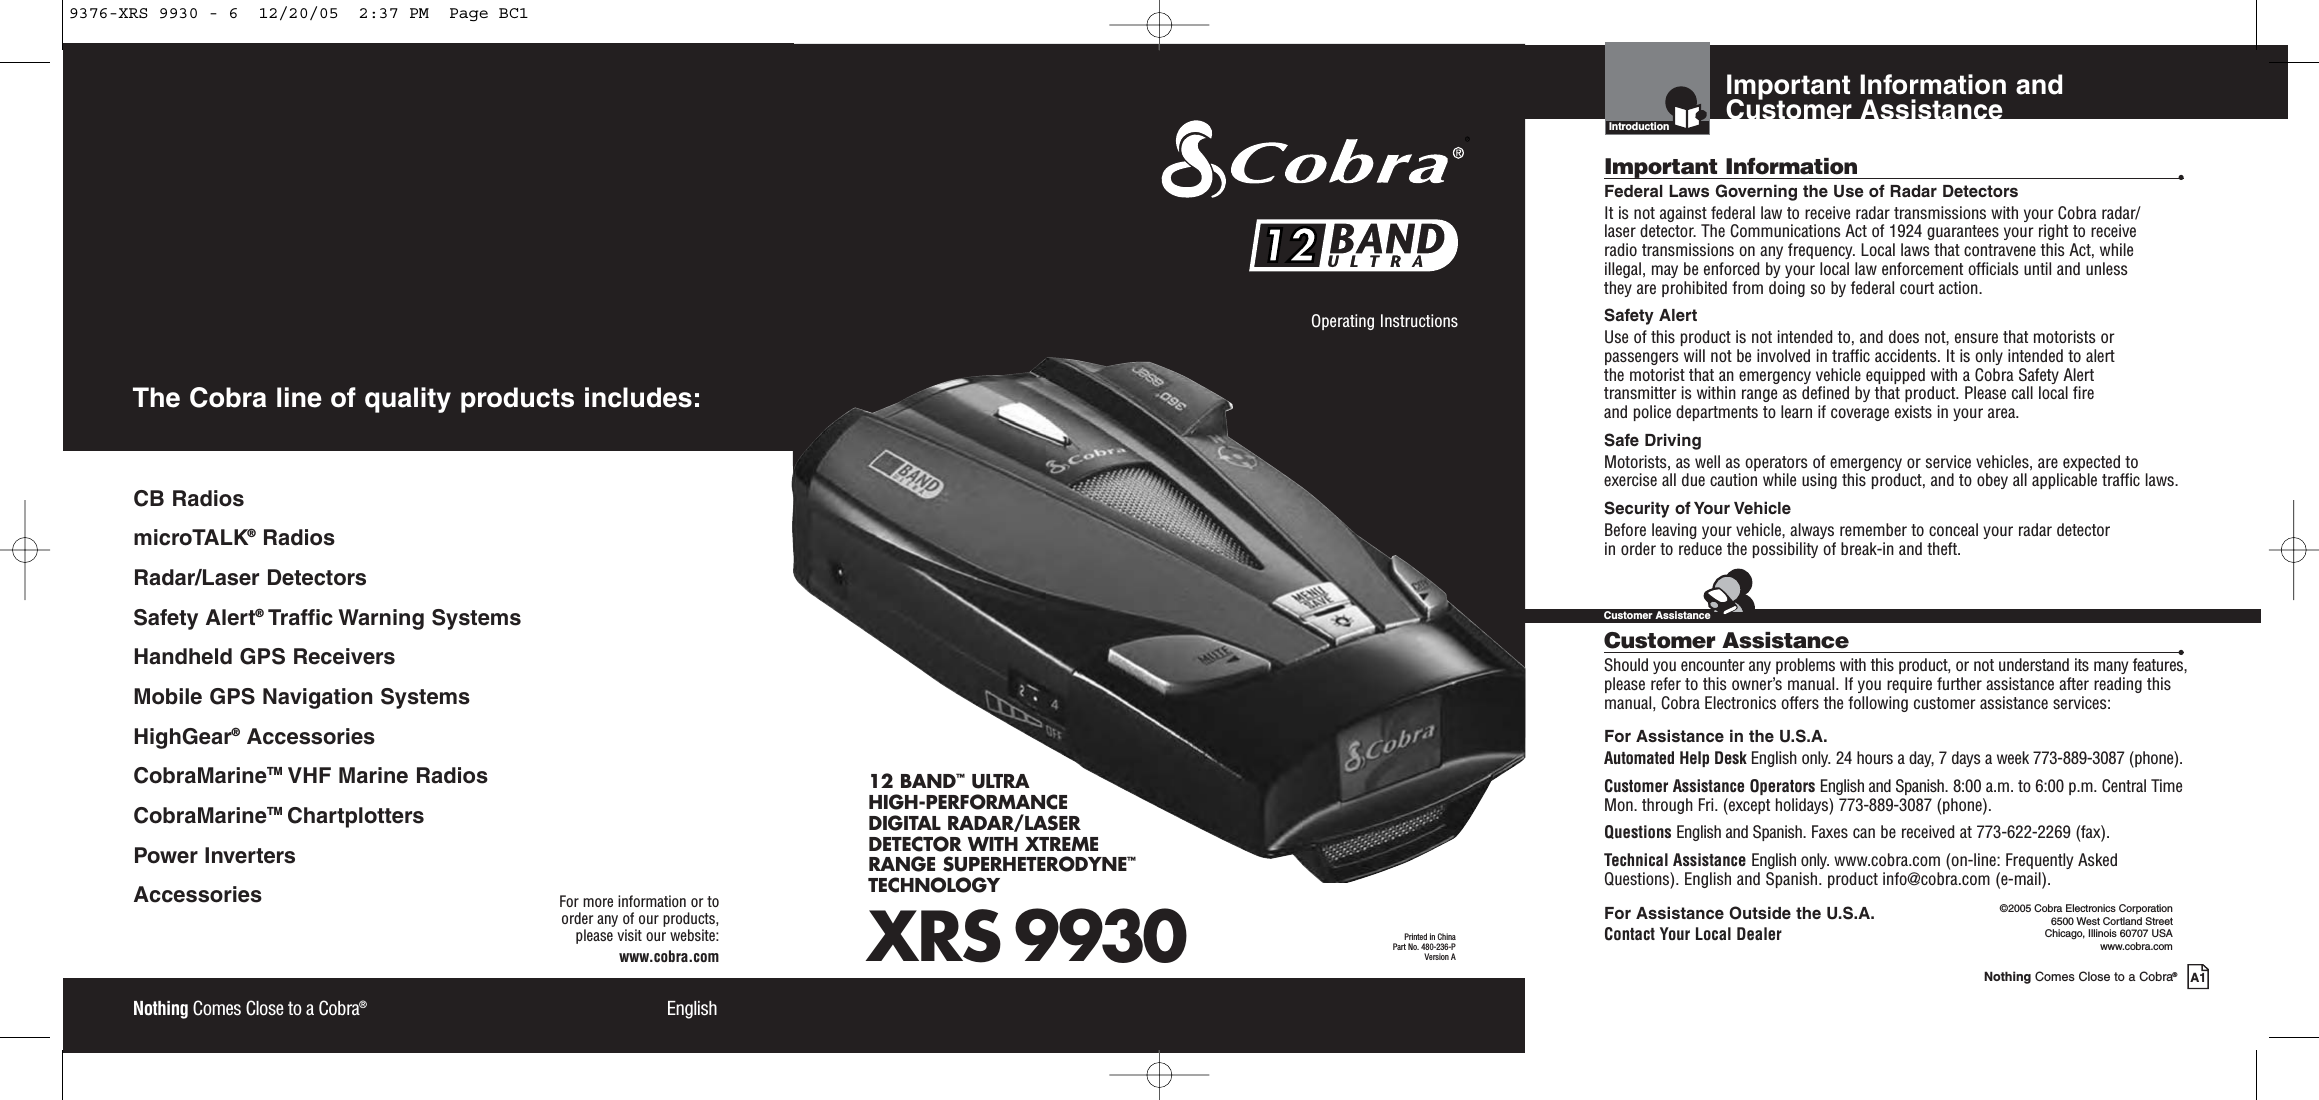 XRS 993012 BAND™ULTRAHIGH-PERFORMANCE DIGITAL RADAR/LASERDETECTOR WITH XTREME RANGE SUPERHETERODYNE™TECHNOLOGYNothing Comes Close to a Cobra®EnglishOperating Instructions Printed in China Part No. 480-236-PVersion A1212Nothing Comes Close to a Cobra®EnglishFor more information or to order any of our products, please visit our website:www.cobra.comCB RadiosmicroTALK®RadiosRadar/Laser Detectors Safety Alert®Traffic Warning SystemsHandheld GPS ReceiversMobile GPS Navigation SystemsHighGear®Accessories CobraMarineTM VHF Marine Radios CobraMarineTM ChartplottersPower InvertersAccessories The Cobra line of quality products includes:Important Information and Customer AssistanceIntroductionNothing Comes Close to a Cobra®A1Important Information •Federal Laws Governing the Use of Radar Detectors It is not against federal law to receive radar transmissions with your Cobra radar/laser detector. The Communications Act of 1924 guarantees your right to receive radio transmissions on any frequency. Local laws that contravene this Act, while illegal, may be enforced by your local law enforcement officials until and unless they are prohibited from doing so by federal court action.Safety AlertUse of this product is not intended to, and does not, ensure that motorists orpassengers will not be involved in traffic accidents. It is only intended to alert the motorist that an emergency vehicle equipped with a Cobra Safety Alert transmitter is within range as defined by that product. Please call local fire and police departments to learn if coverage exists in your area.Safe Driving Motorists, as well as operators of emergency or service vehicles, are expected toexercise all due caution while using this product, and to obey all applicable traffic laws.Security of Your Vehicle Before leaving your vehicle, always remember to conceal your radar detector in order to reduce the possibility of break-in and theft.Customer Assistance •Should you encounter any problems with this product, or not understand its many features,please refer to this owner’s manual. If you require further assistance after reading thismanual, Cobra Electronics offers the following customer assistance services:For Assistance in the U.S.A.Automated Help Desk English only. 24 hours a day, 7 days a week 773-889-3087 (phone).Customer Assistance Operators English and Spanish. 8:00 a.m. to 6:00 p.m. Central TimeMon. through Fri. (except holidays) 773-889-3087 (phone).Questions English and Spanish. Faxes can be received at 773-622-2269 (fax).Technical Assistance English only. www.cobra.com (on-line: Frequently AskedQuestions). English and Spanish. product info@cobra.com (e-mail).For Assistance Outside the U.S.A.Contact Your Local Dealer©2005 Cobra Electronics Corporation6500 West Cortland StreetChicago, Illinois 60707 USAwww.cobra.comCustomer Assistance9376-XRS 9930 - 6  12/20/05  2:37 PM  Page BC1